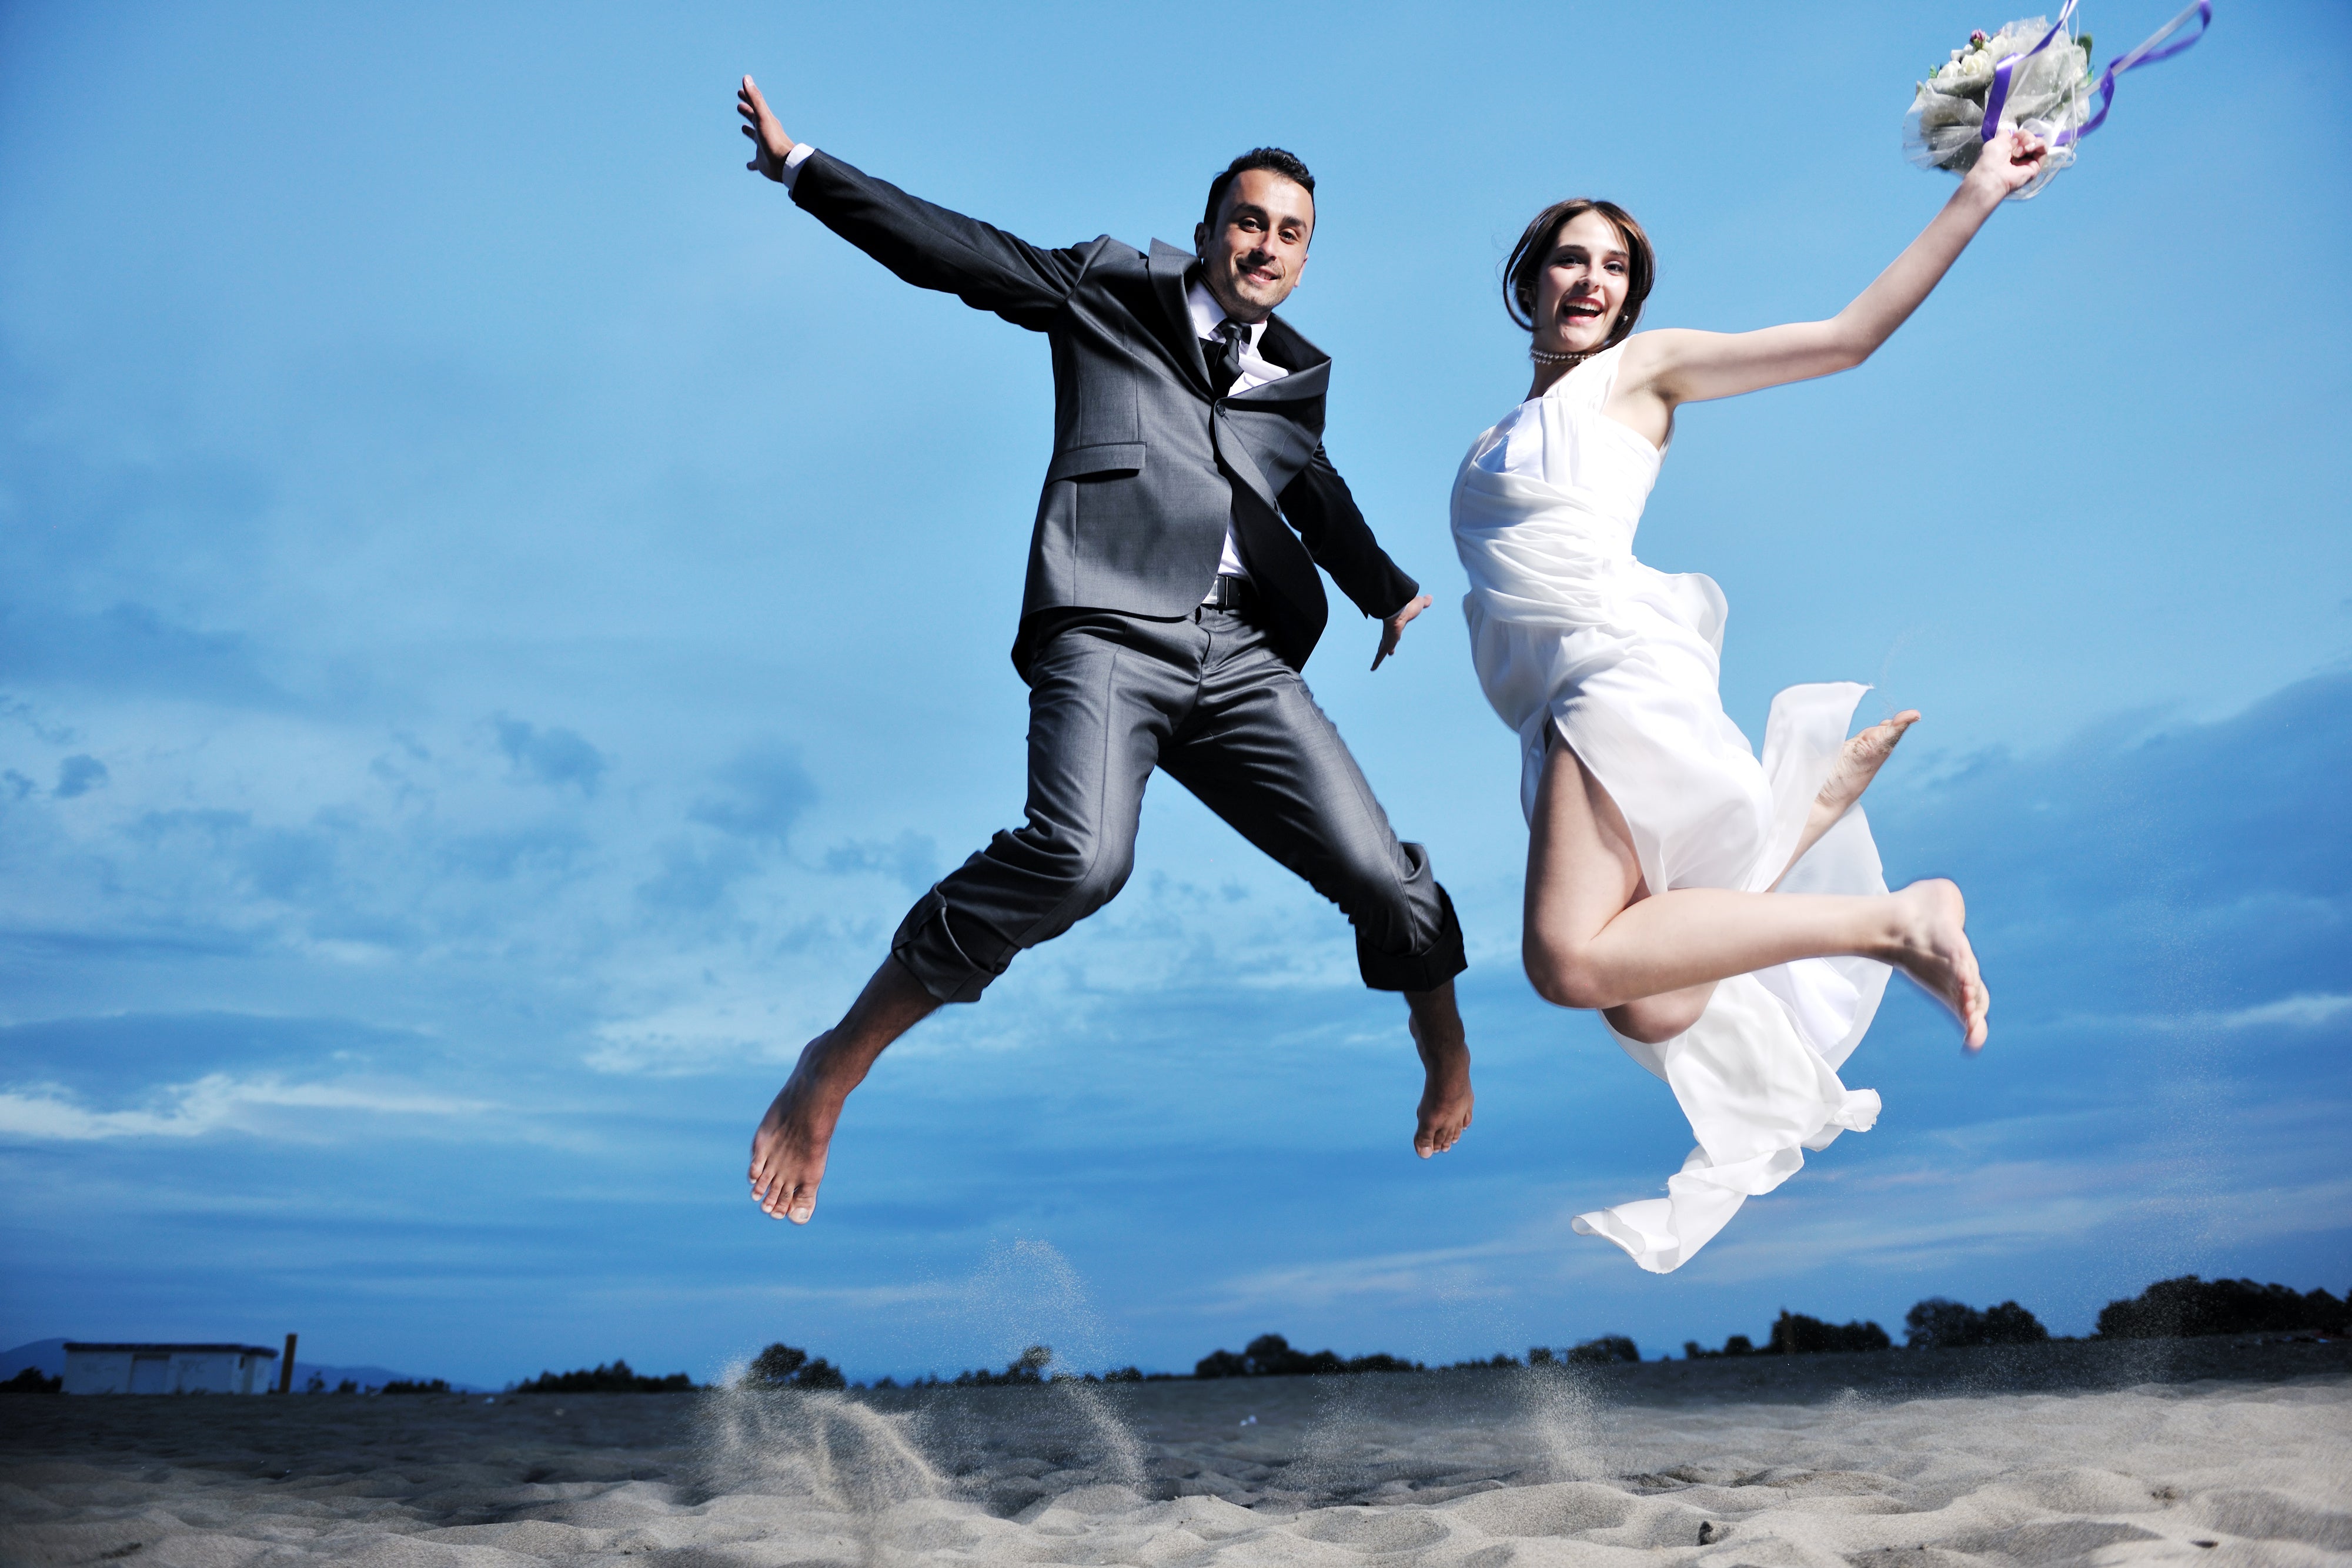 Bride and groom having fun jumping in the air at the beach